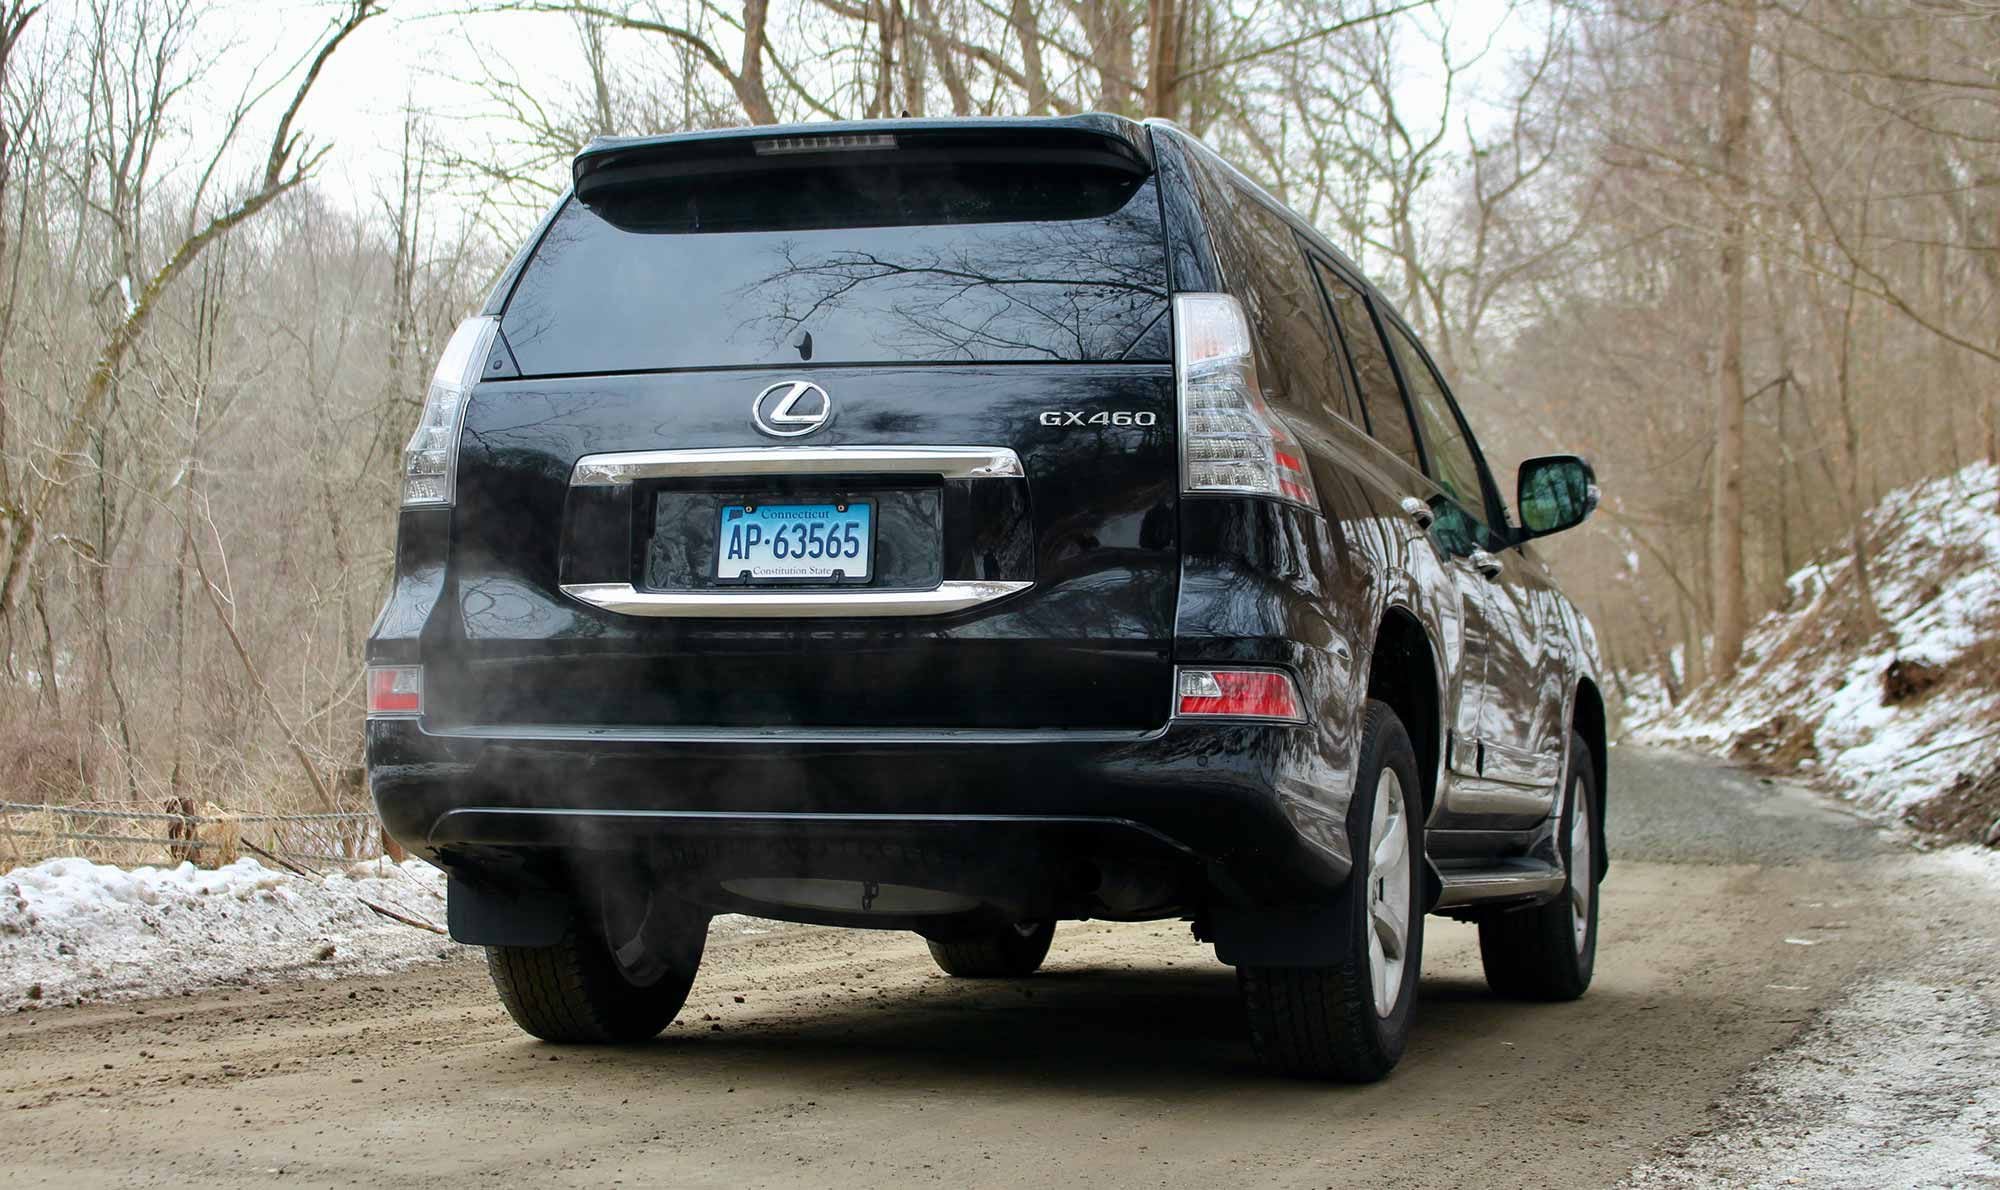 The GX 460 is capable of towing 6,500 pounds. It has a factory hookup for trailer electric, but ours didn’t come with a hitch. More on that in the near future.